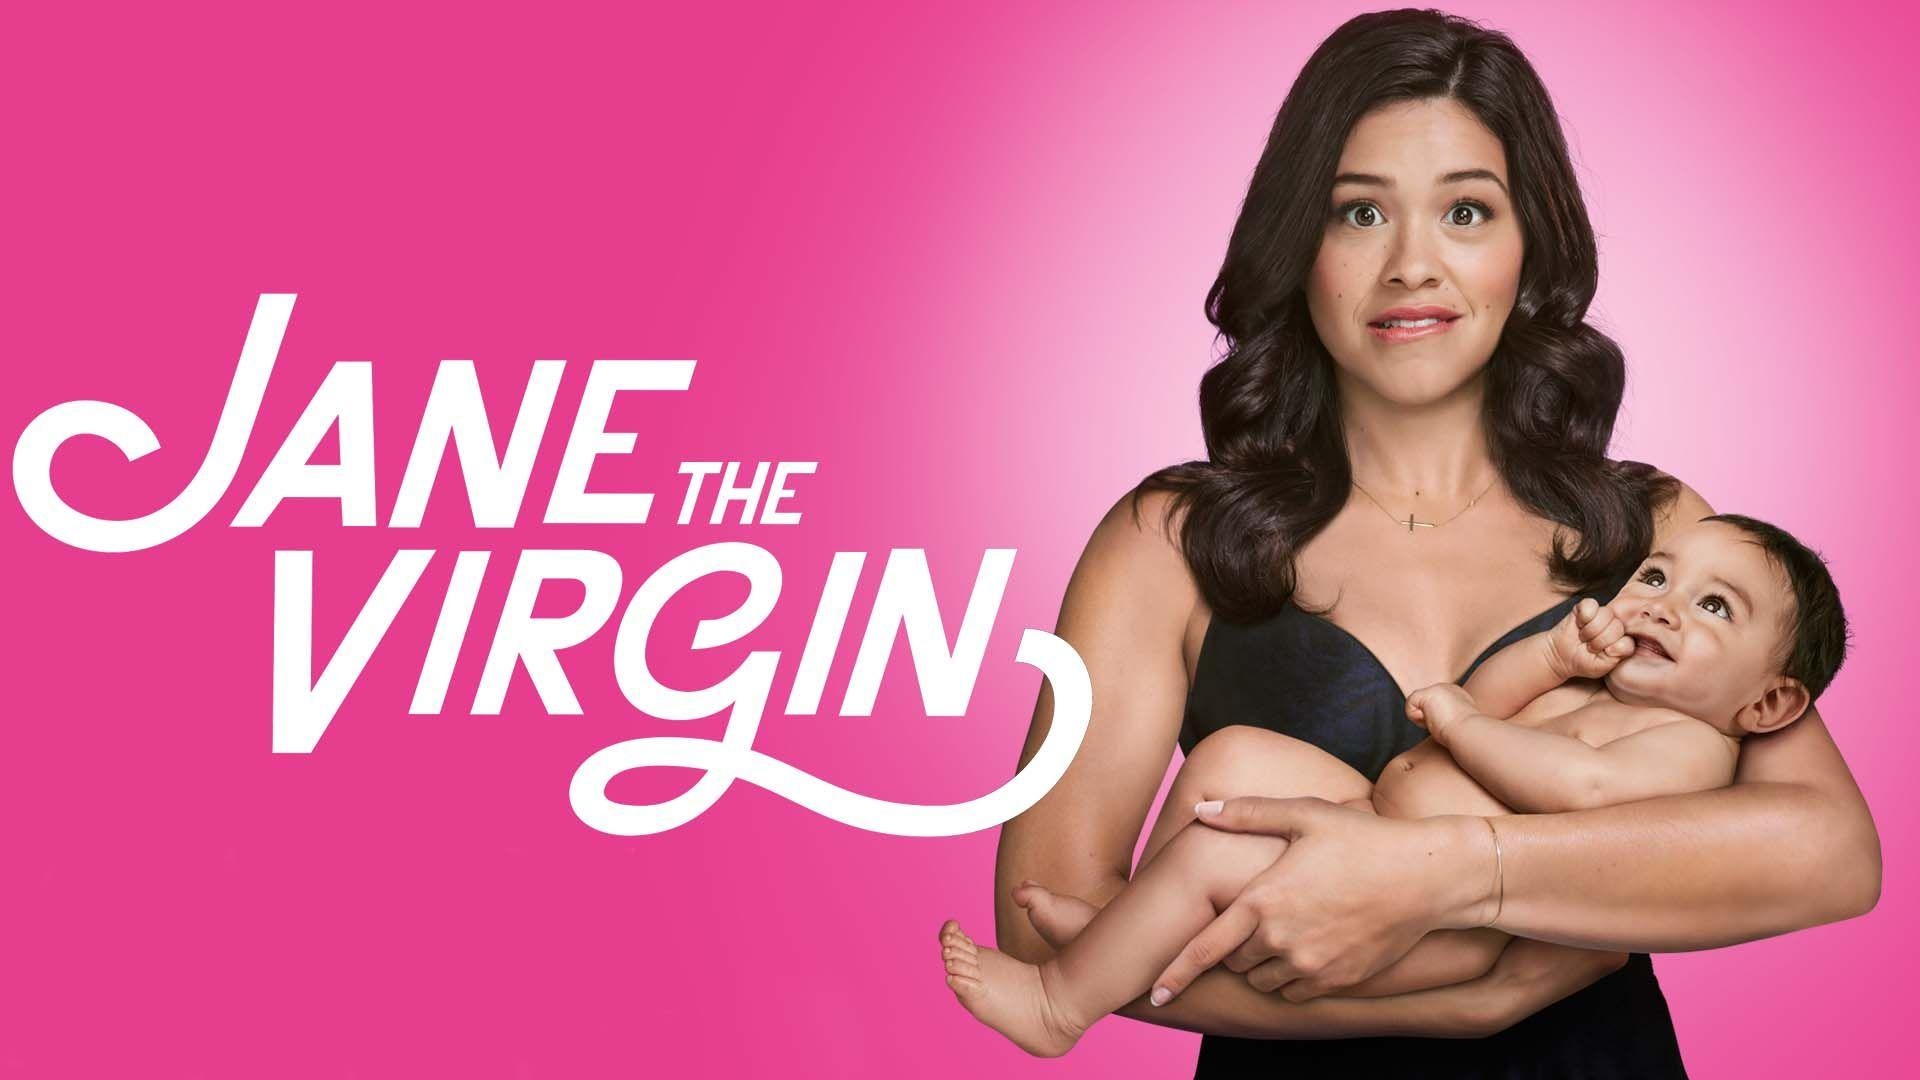 Jane the Virgin, Heartfelt comedy, Love and family, Unconventional protagonist, 1920x1080 Full HD Desktop